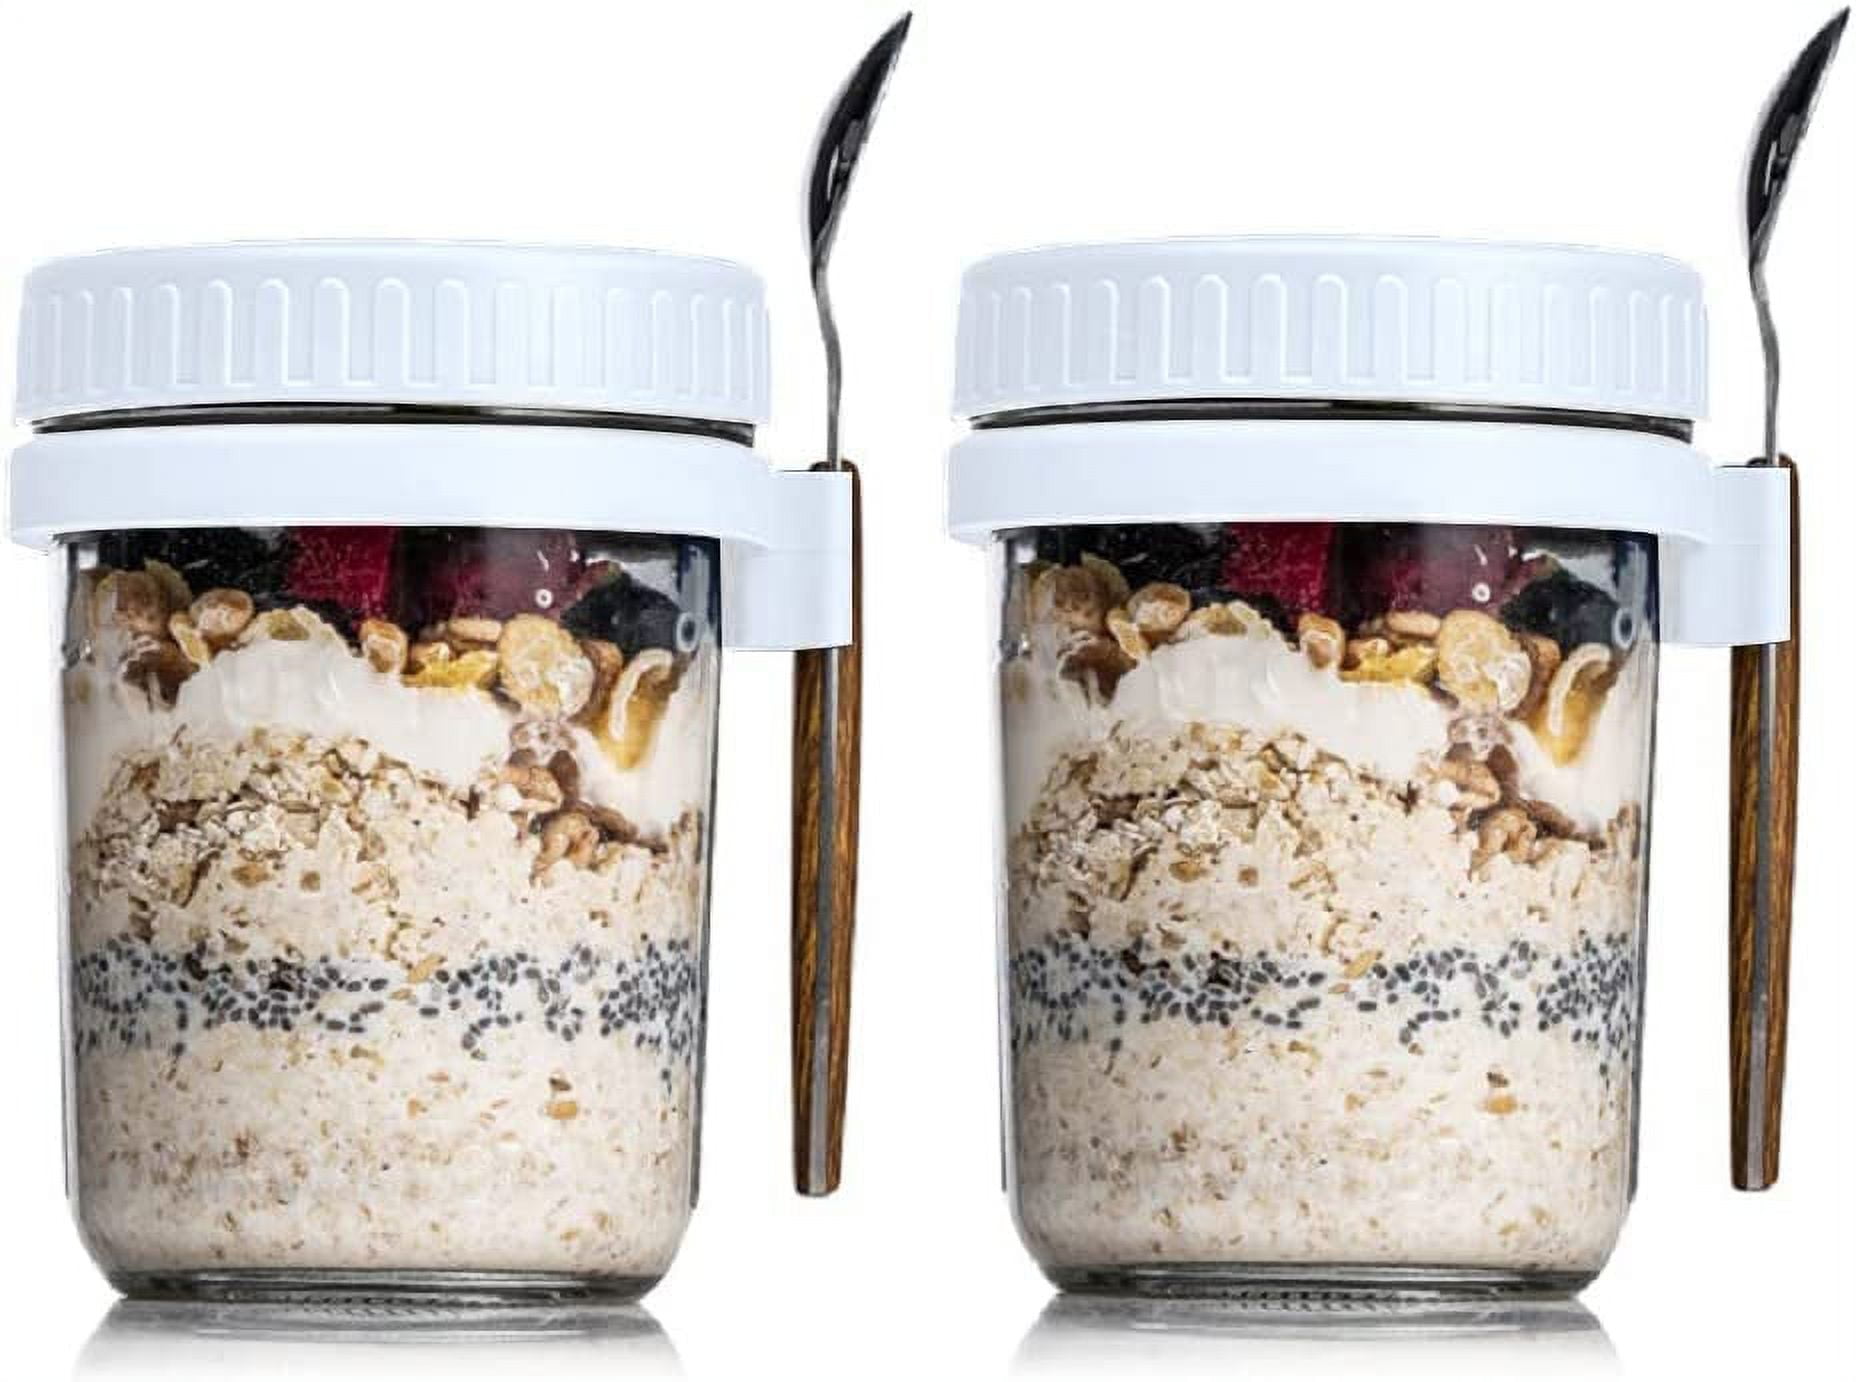 EJWQWQE Overnight Oats Container With Lid And Spoon, Overnight Oats Jars,  Portable Mason Jars With Lid For Cereal Container Capacity 350ML 